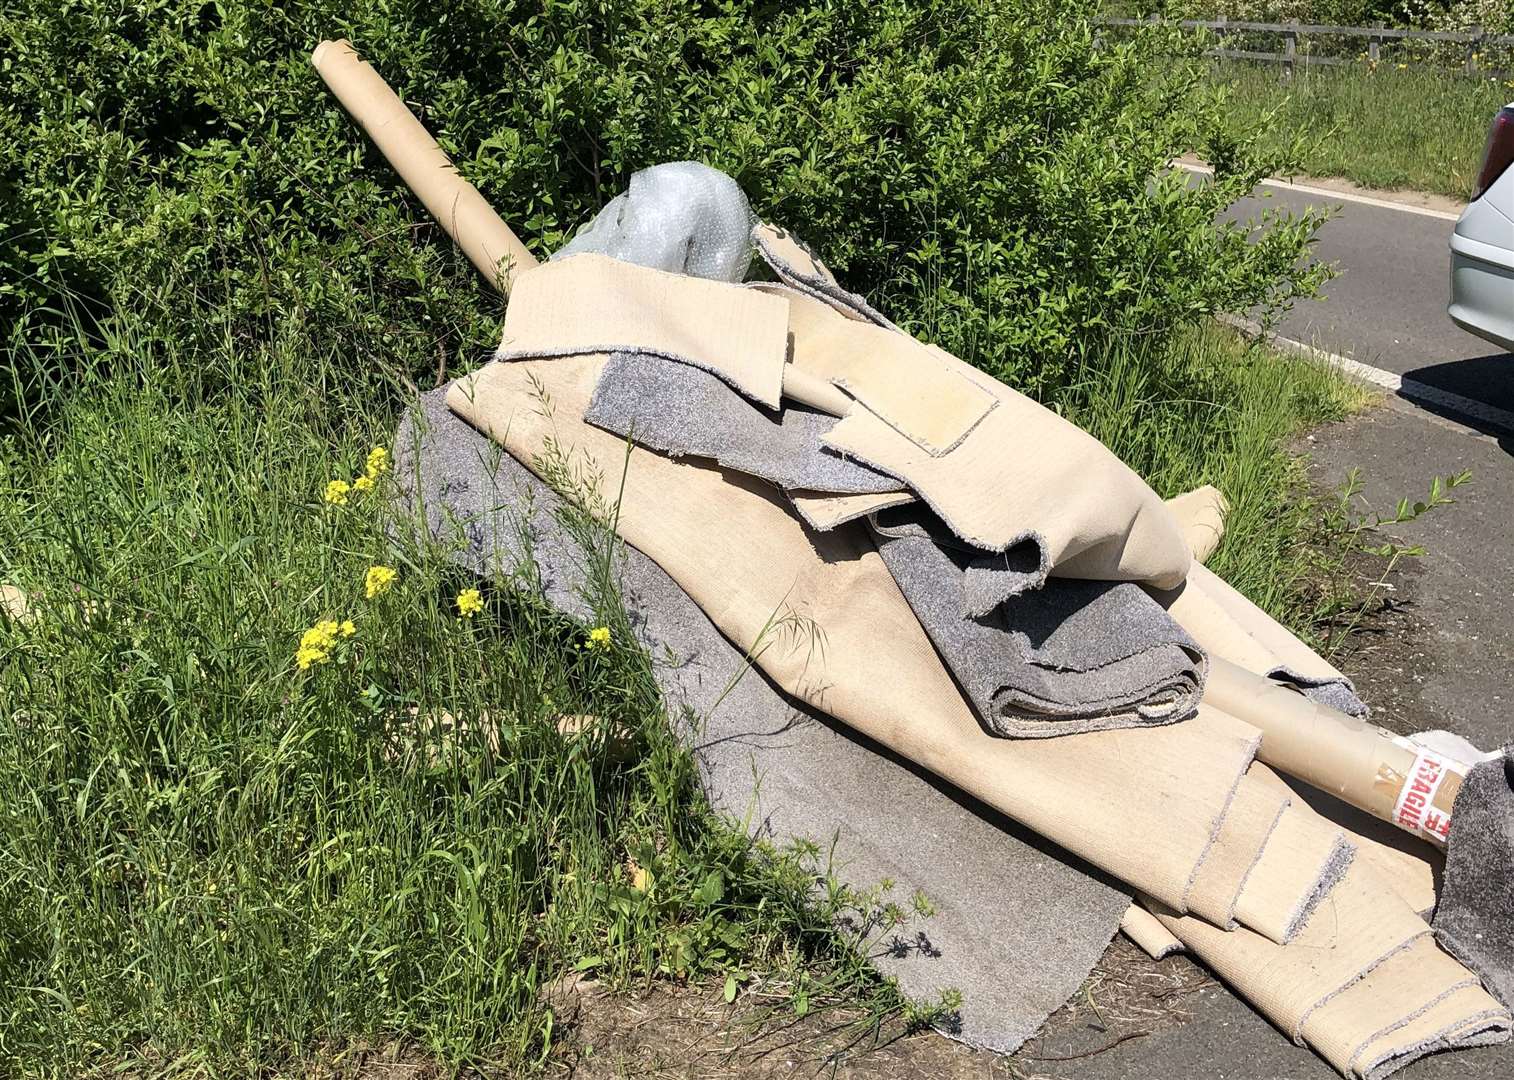 Kingsnorth was identified as the previous owner of a carpet and other household waste fly-tipped in Northfleet Picture: Gravesham Council